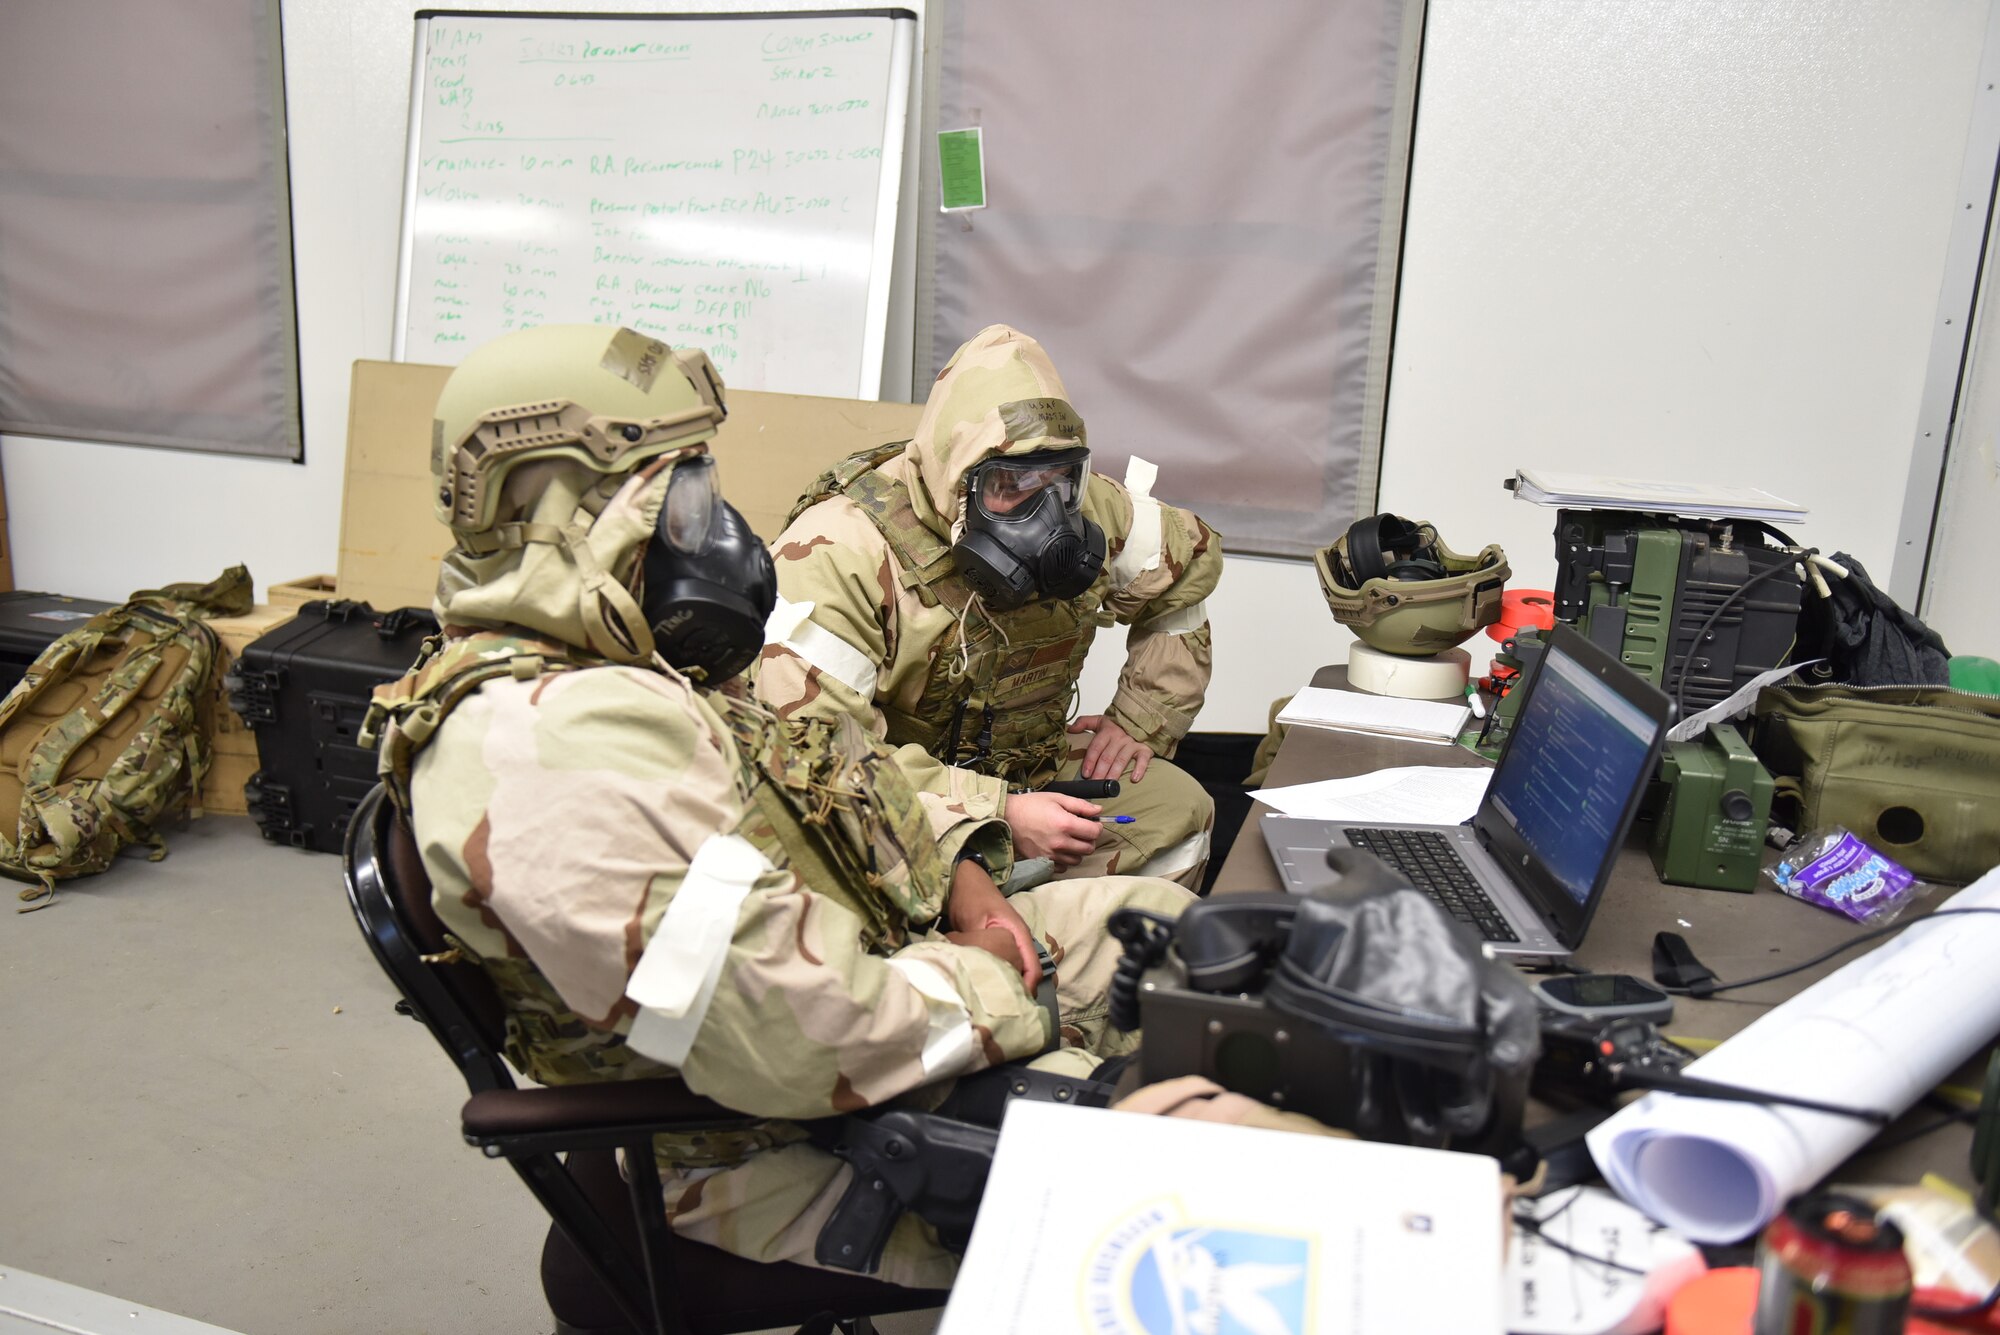 Photo shows two Airmen logging into a laptop.